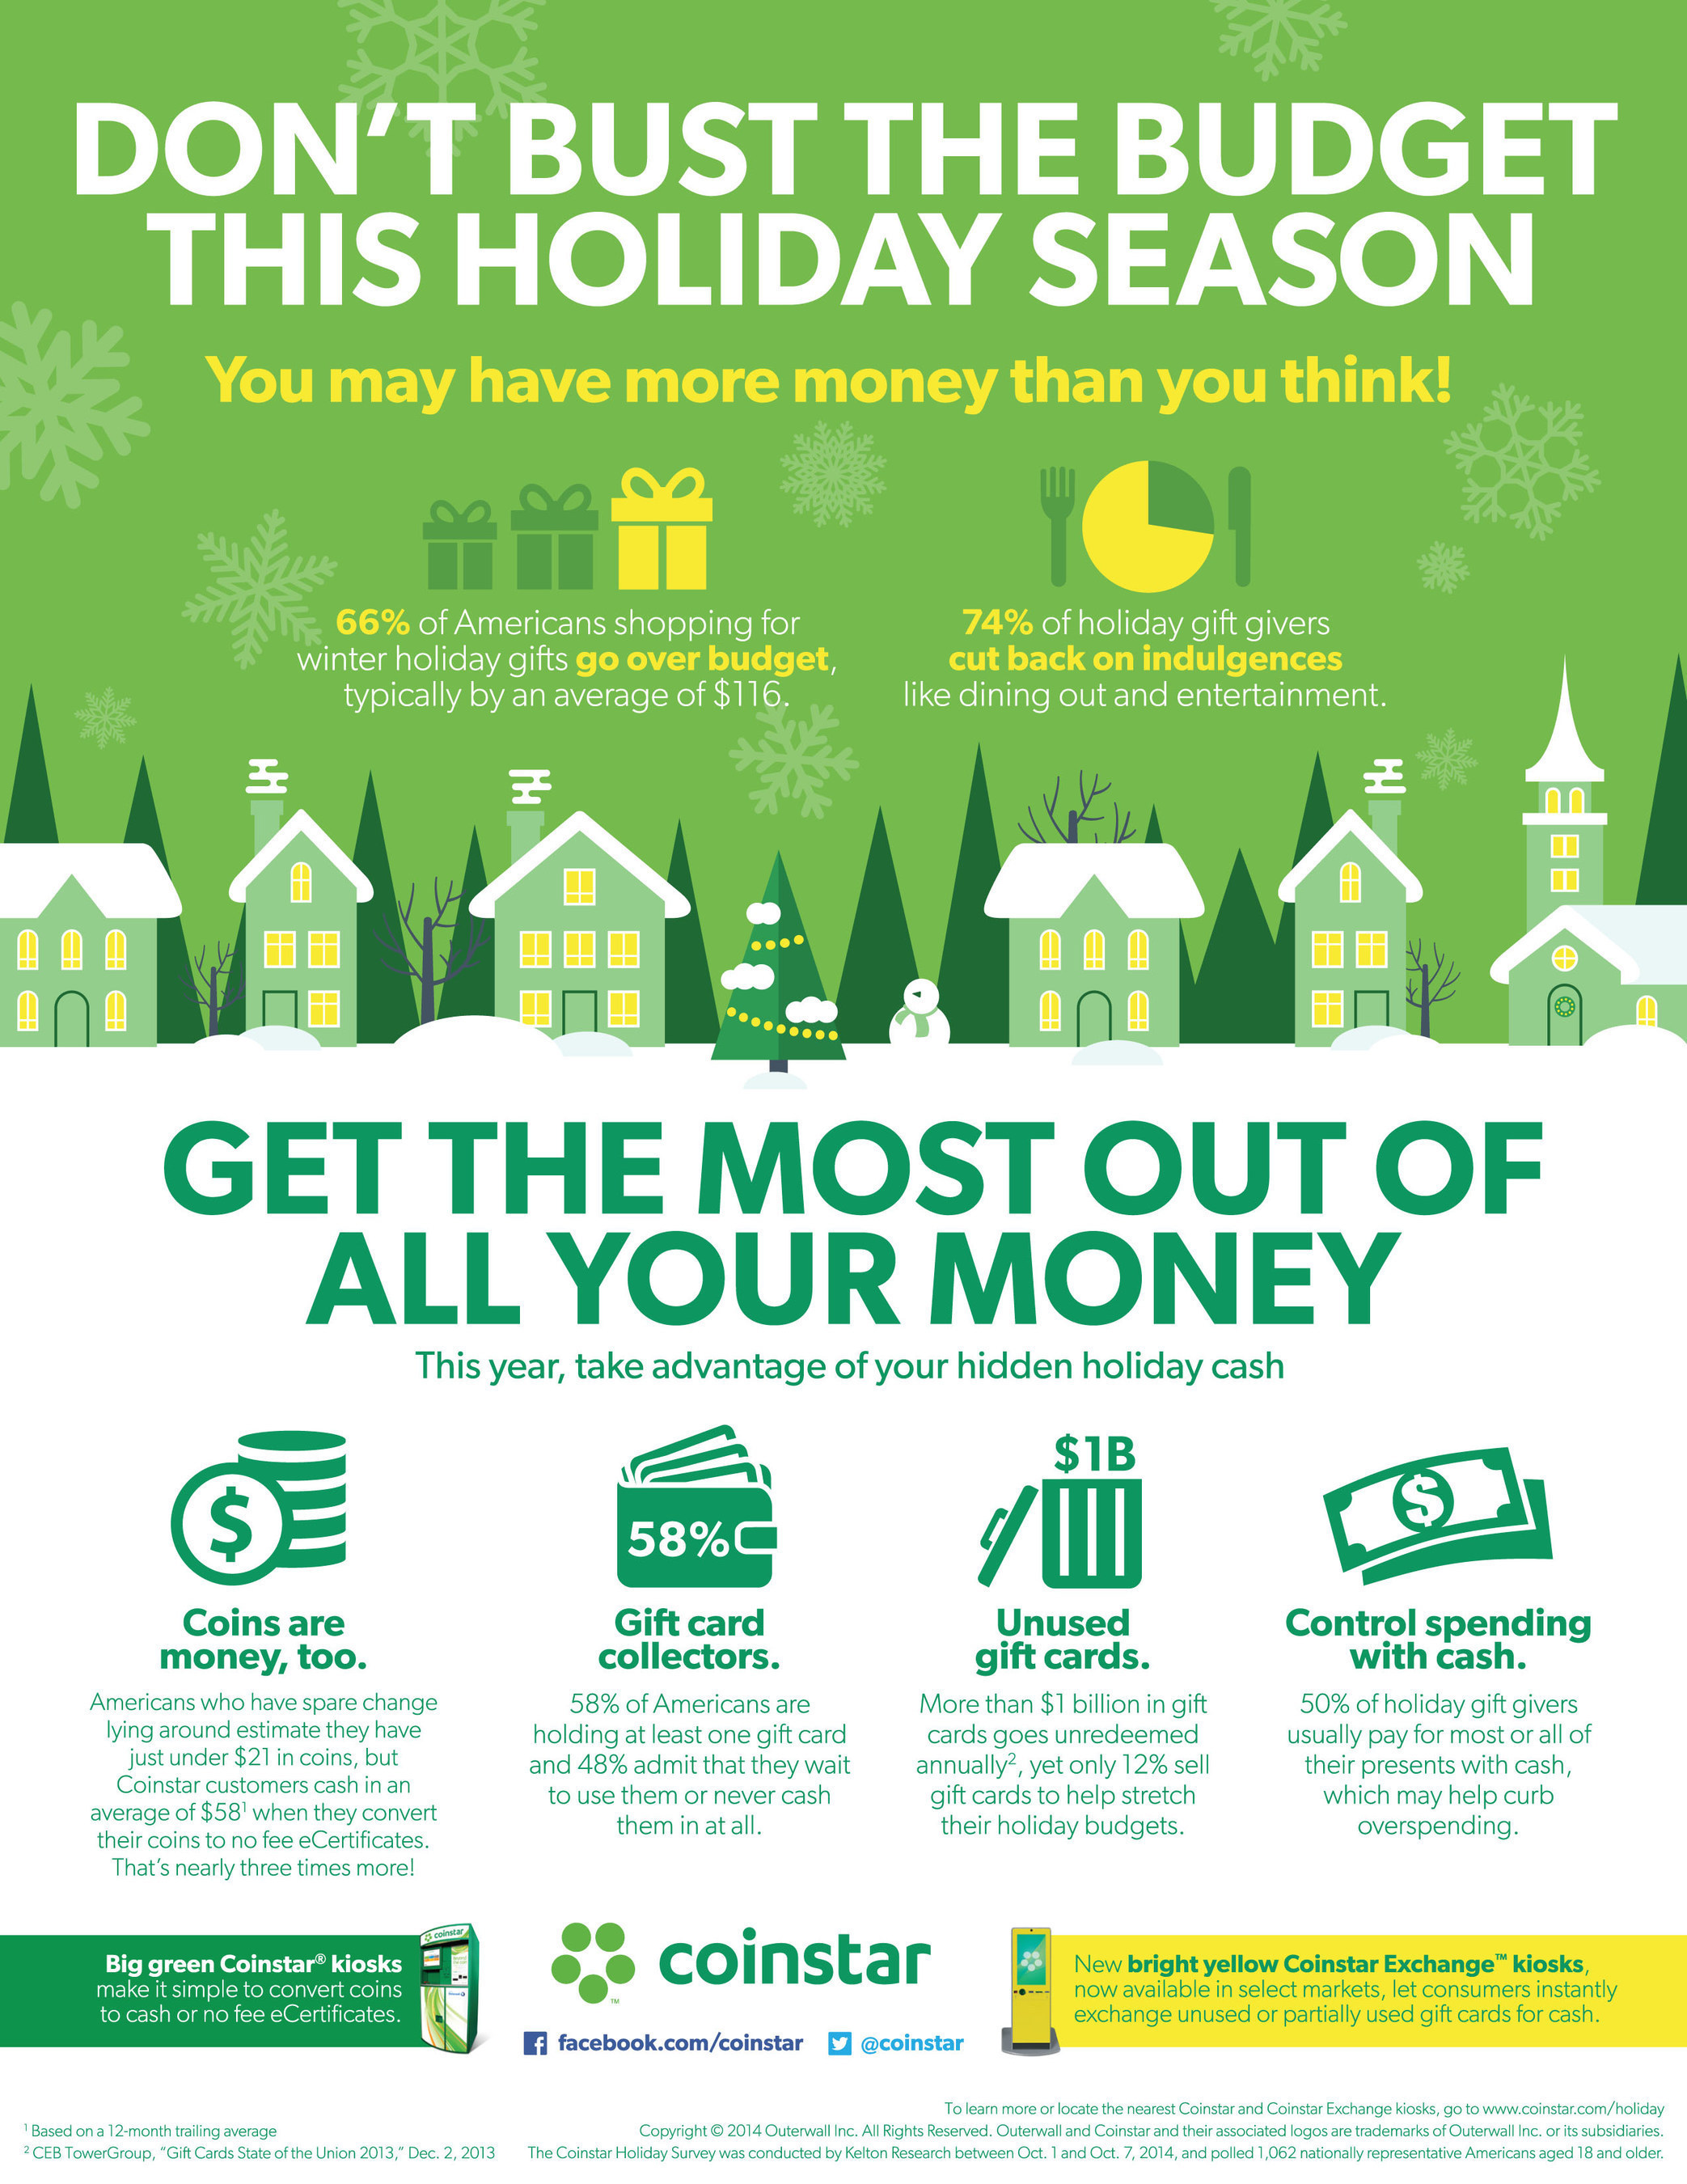 Don’t bust the budget this holiday season! Consider Coinstar and Coinstar Exchange to get the most out of all your money.